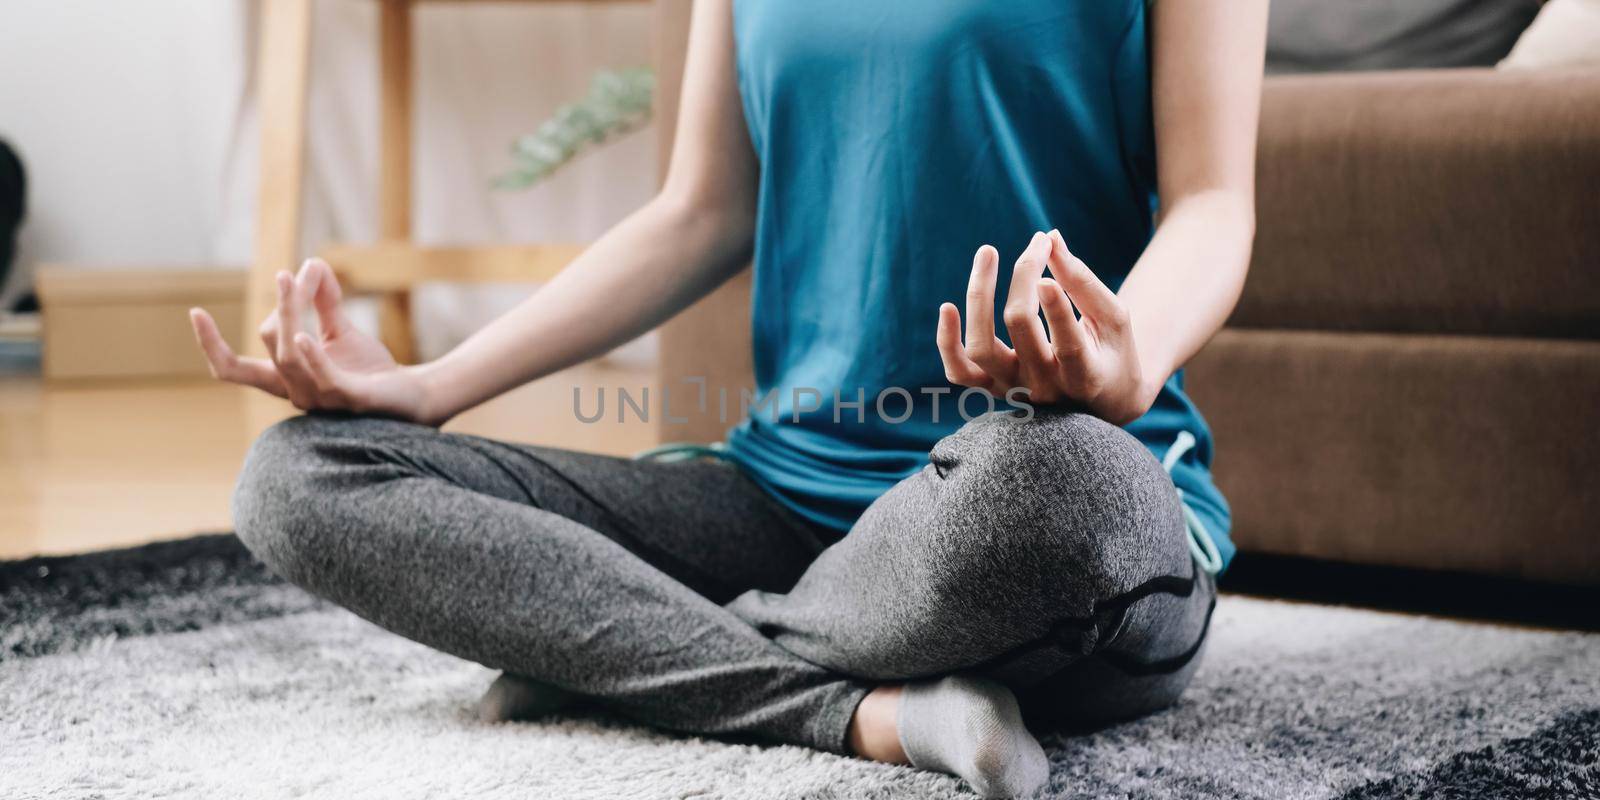 Class of yoga with meditate hands of Asia woman doing meditation Healthcare, lifestyle concept.National Physical Fitness and Sports Month. National Yoga Awareness Month by wichayada